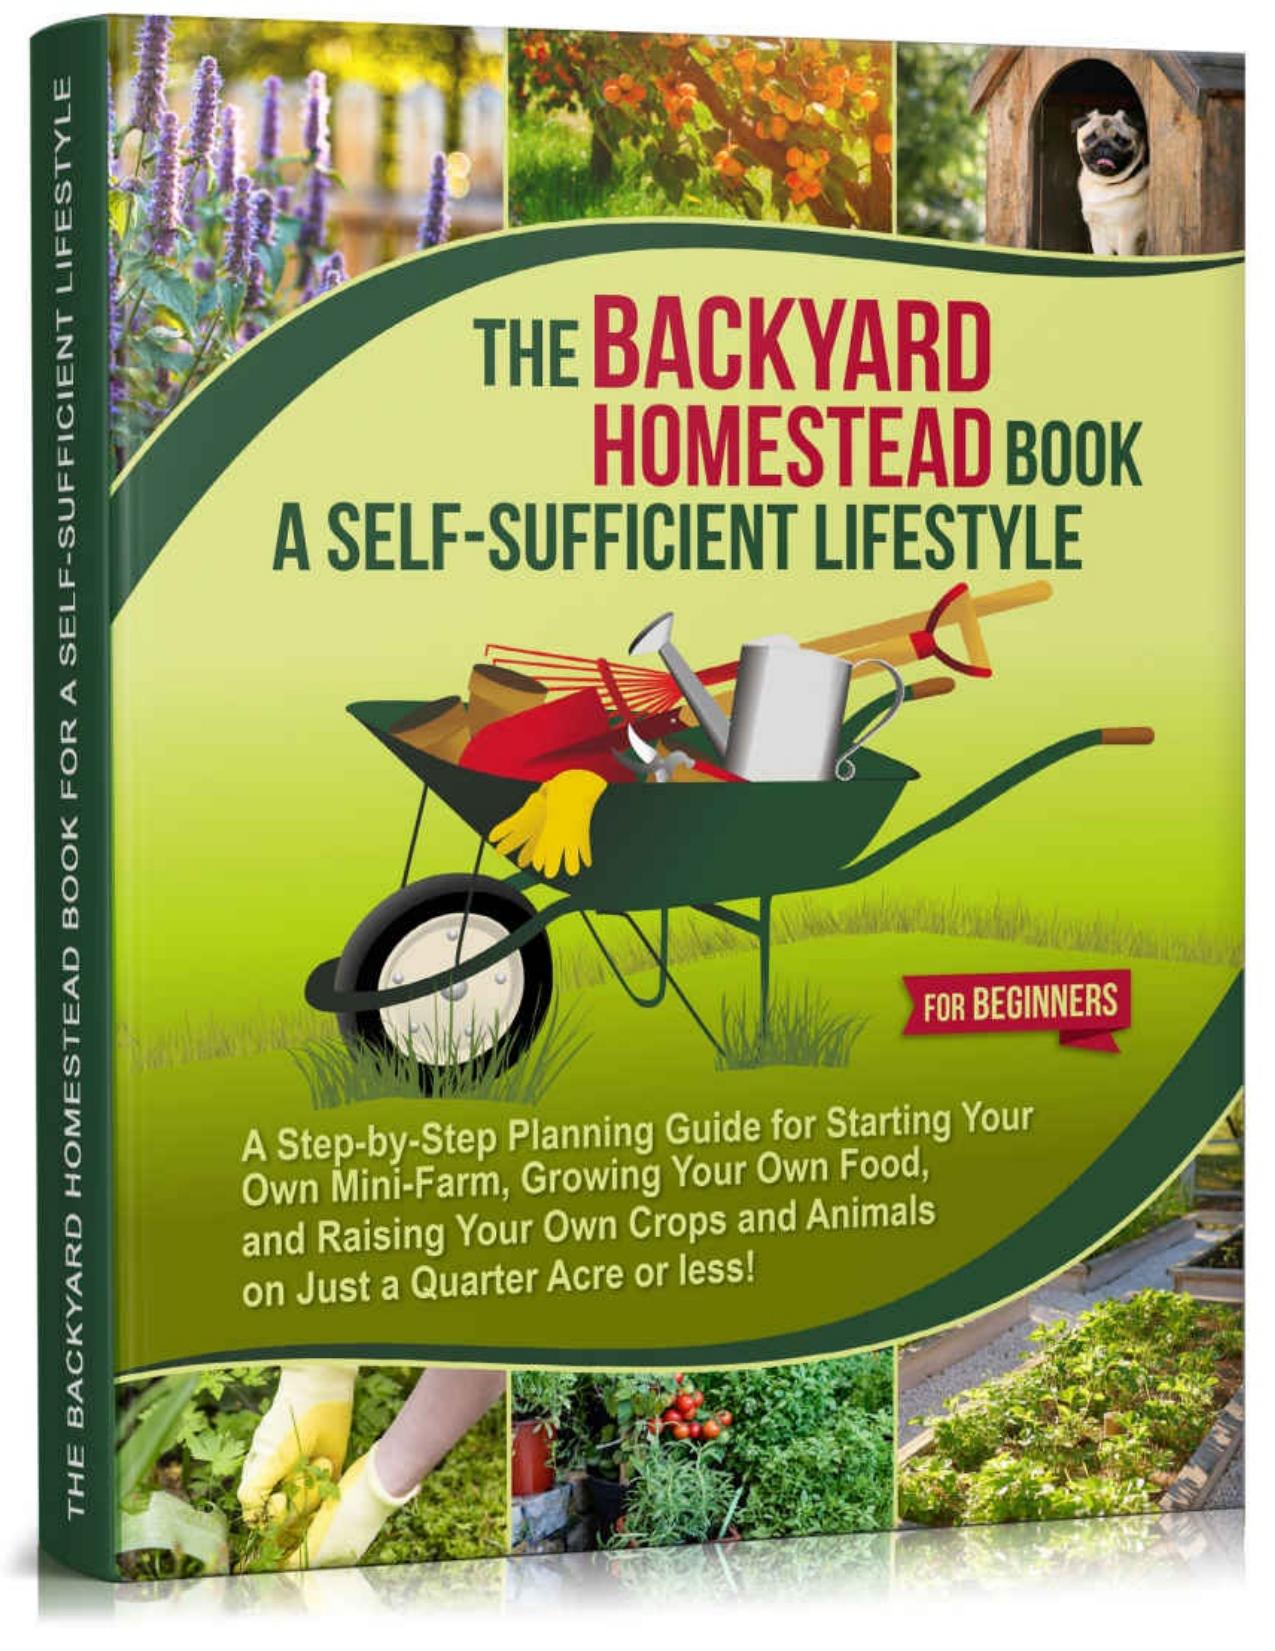 The Backyard Homestead Book for a Self-Sufficient Lifestyle. For Beginners by Bradford Collin